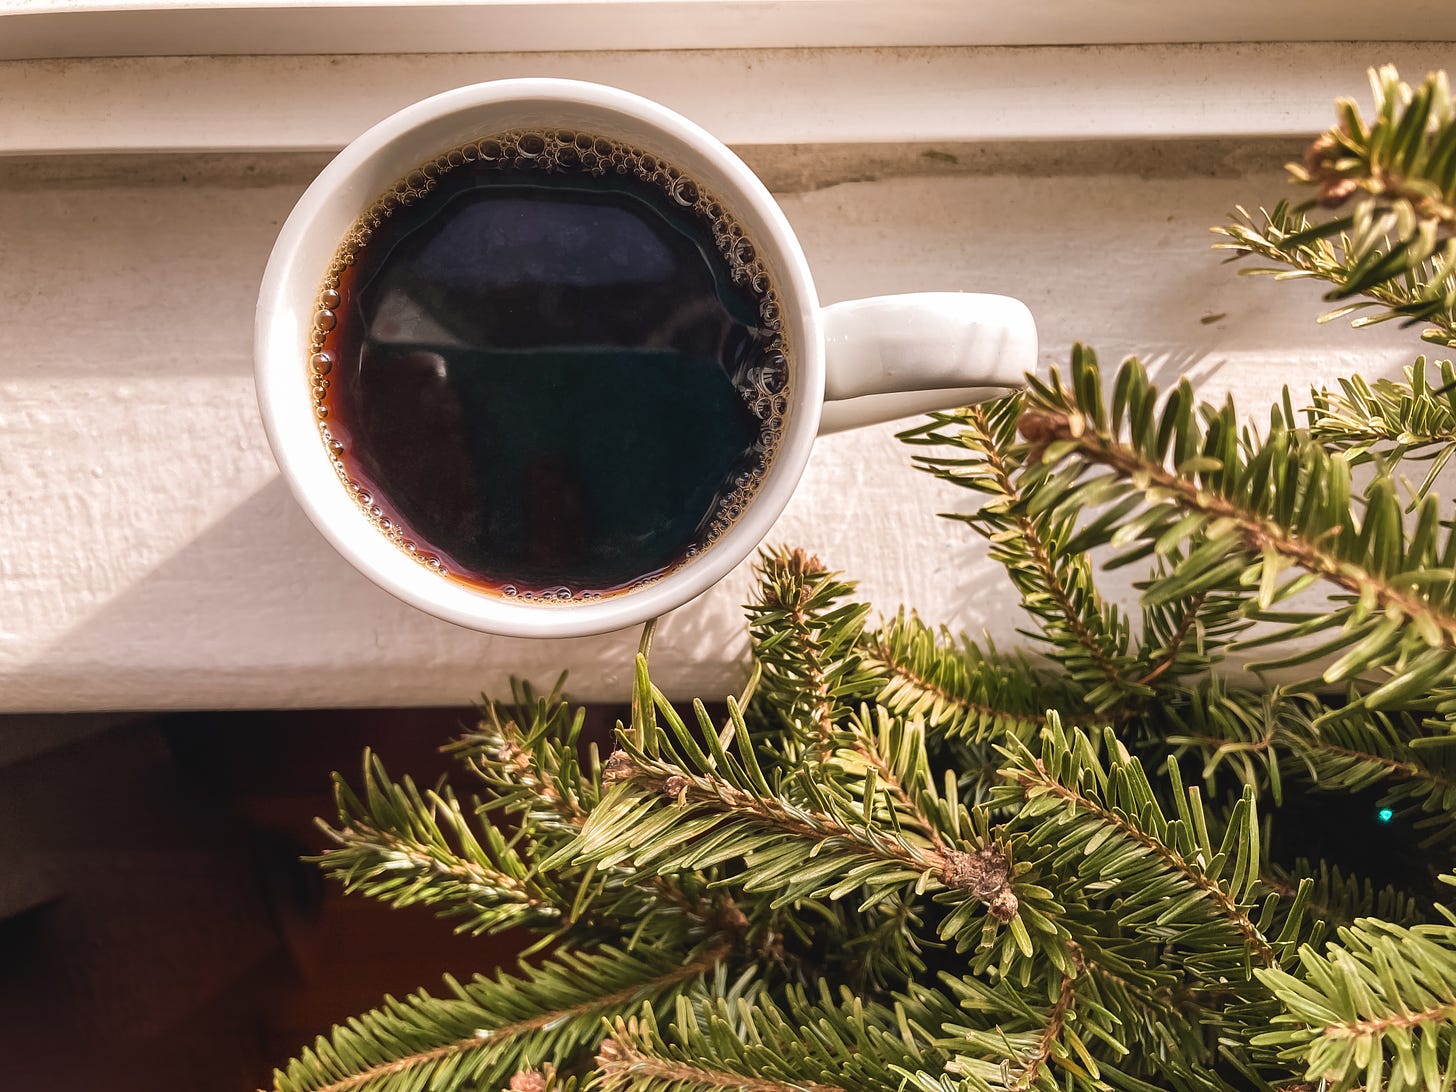 Coffee in a white mug, sitting on a dirty window sill next to a pine tree.